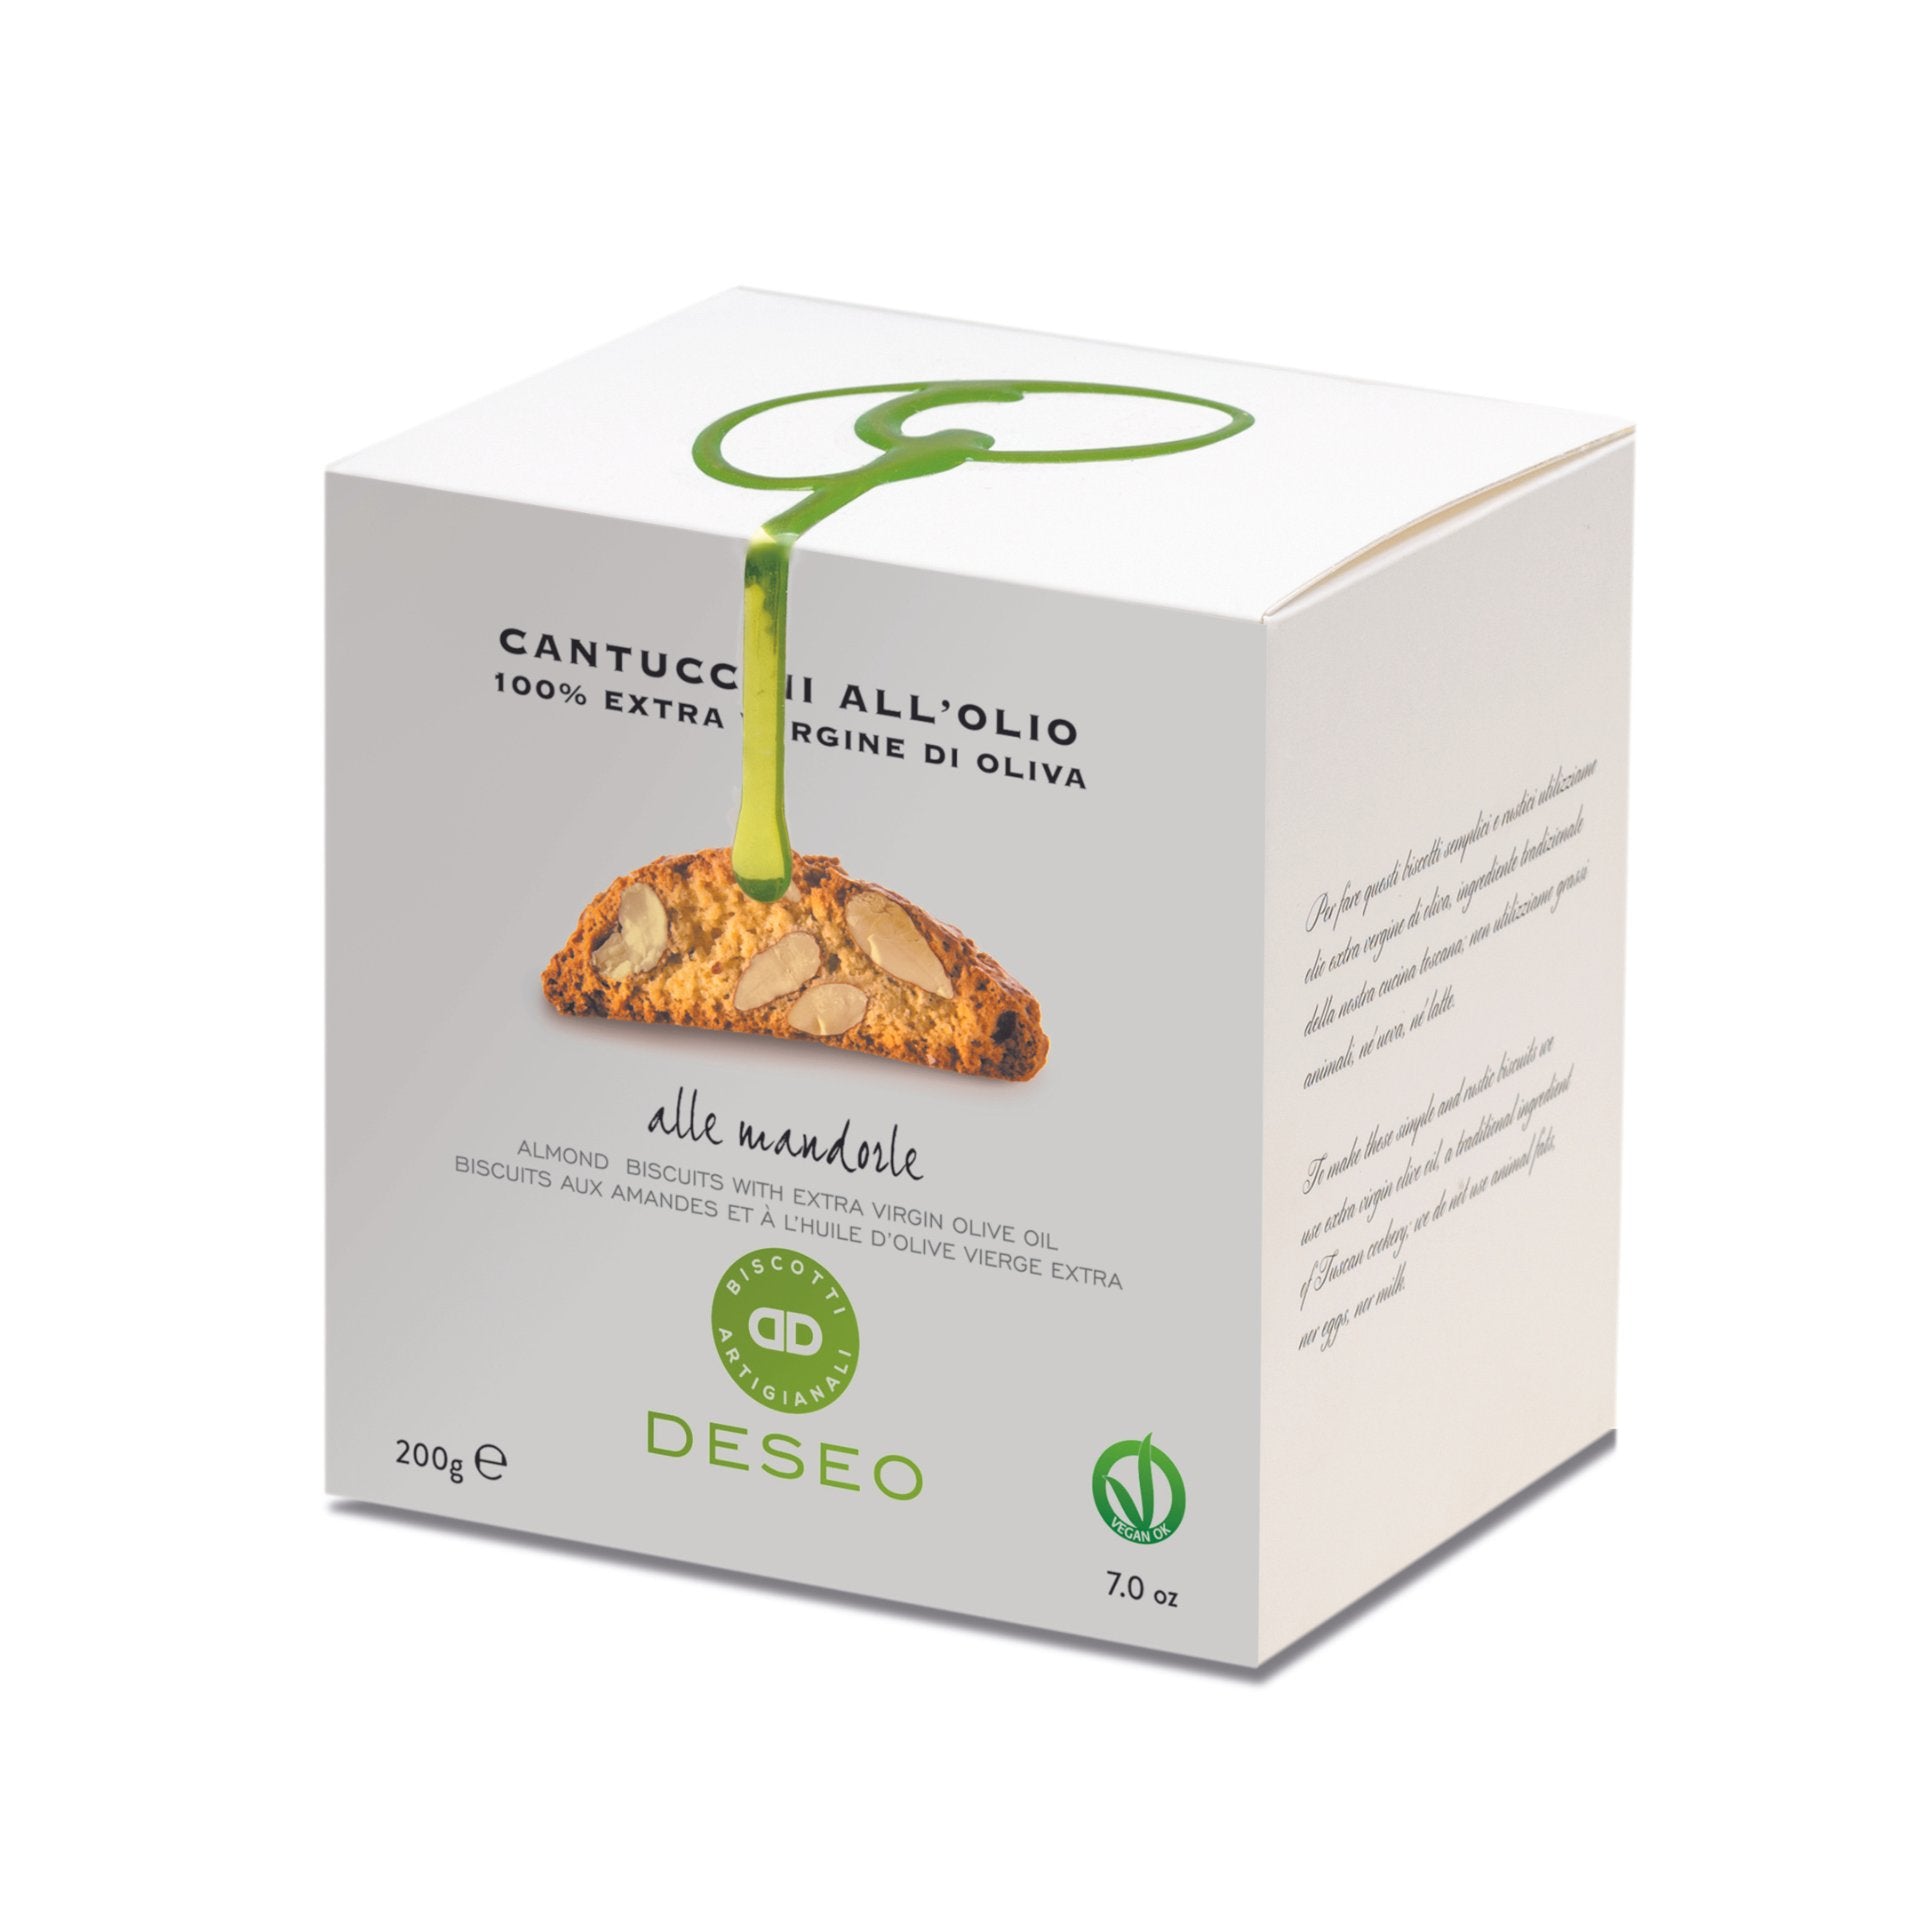 Deseo Cantuccini Toscani with Extra Virgin Olive Oil 200g (Box)  | Imported and distributed in the UK by Just Gourmet Foods